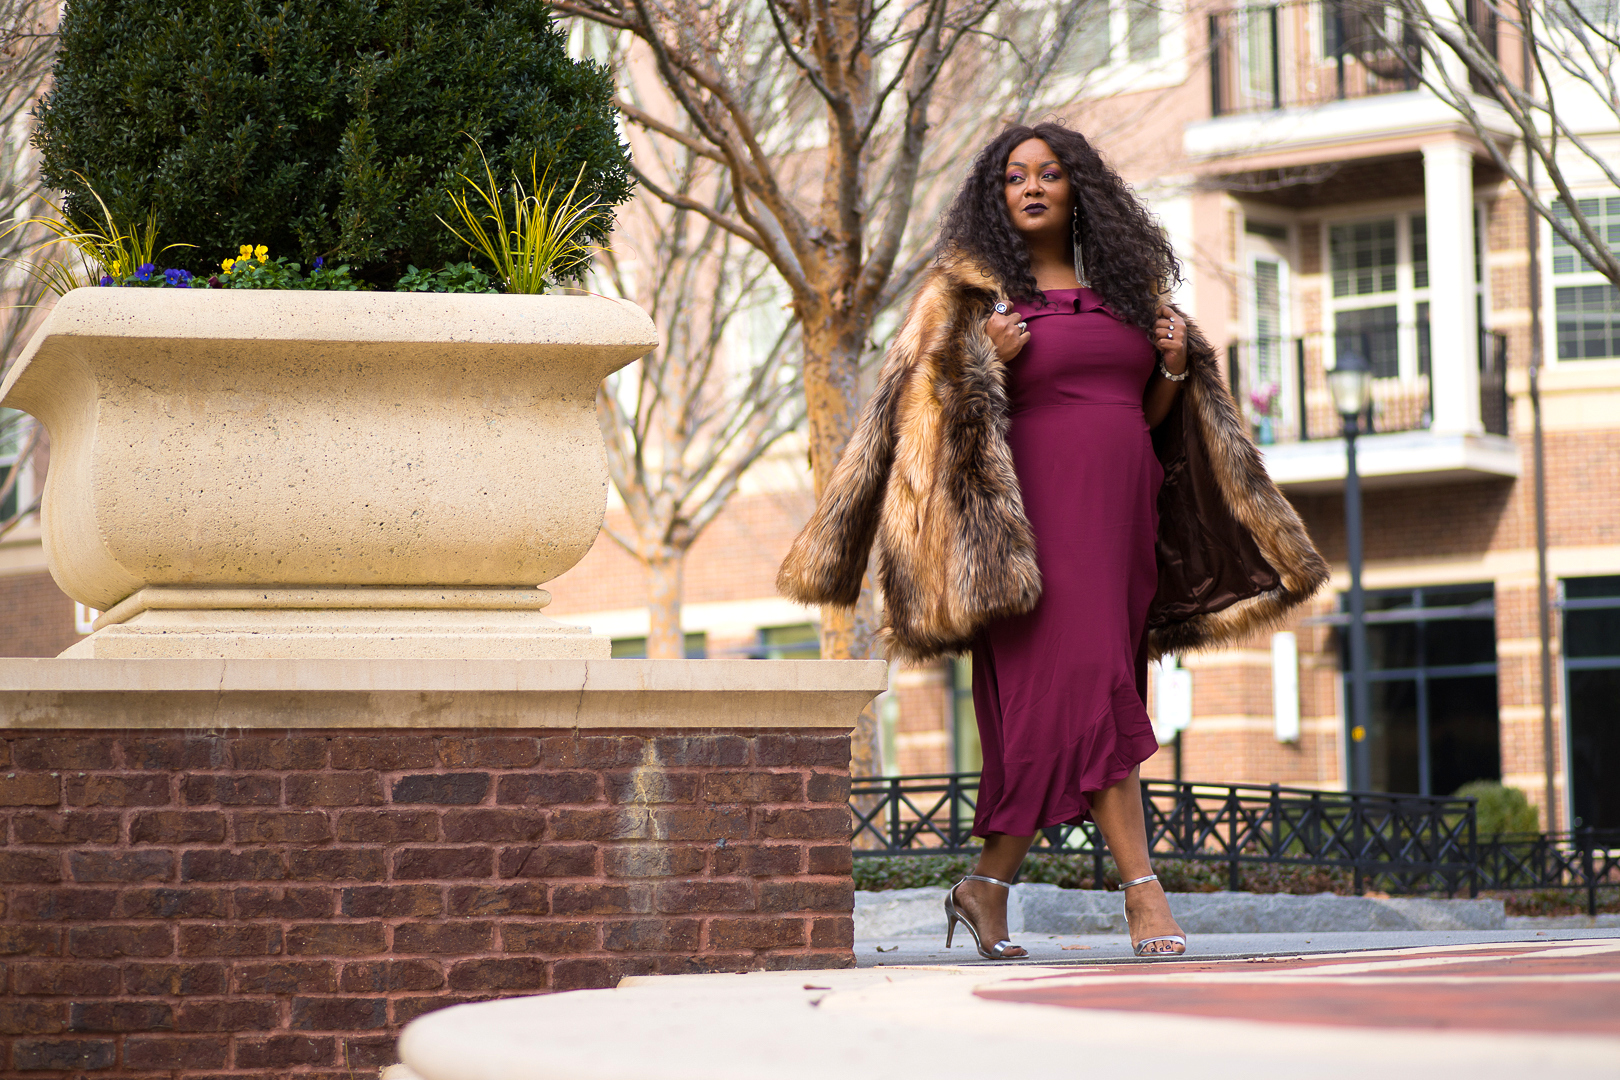 City Chic Giveaway on The Curvy Fashionista 